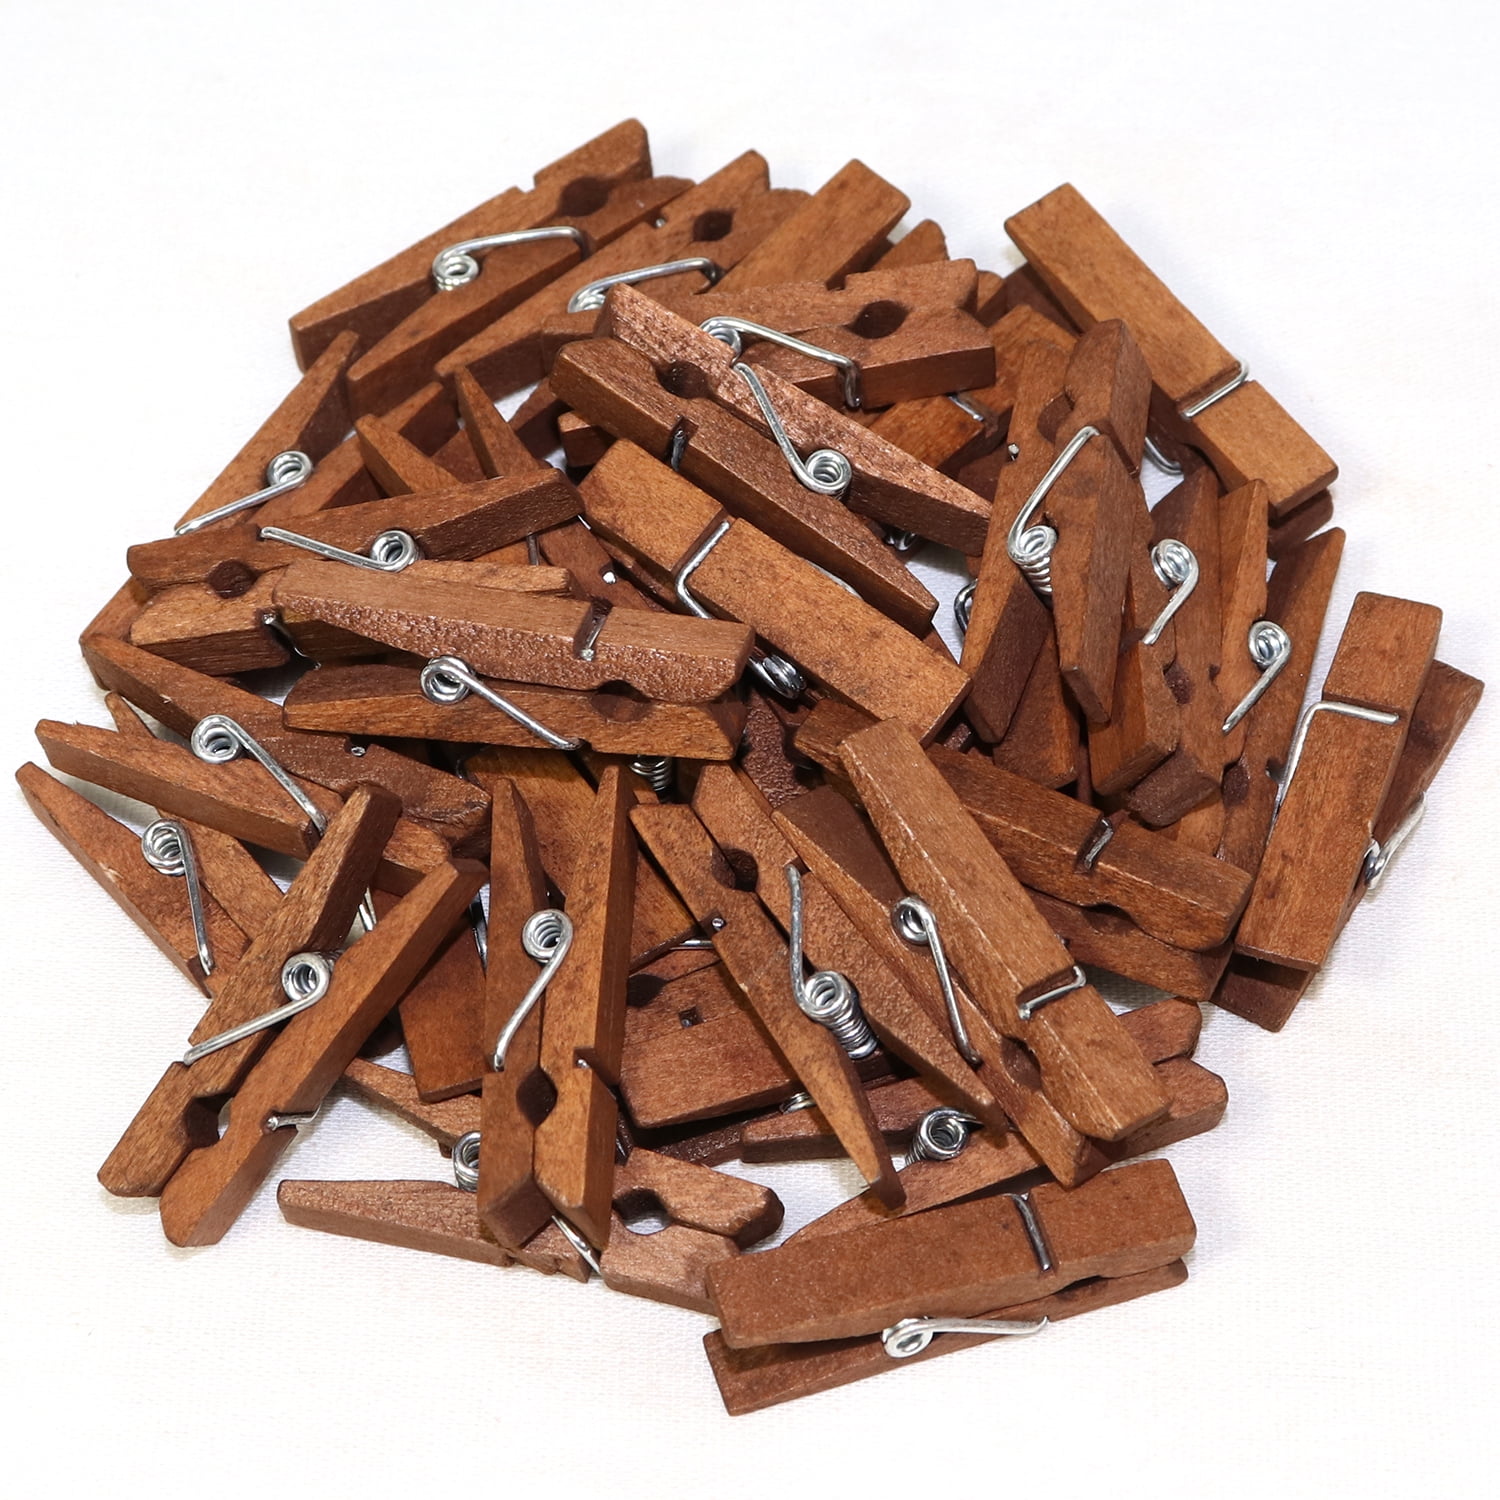 Xelparuc 100pcs Mini Clothespins Wooden Clips, Clothes Pins Colored, Mini Natural Wooden Clothespins Multi-function Clothespins Photo Paper Peg Pin Craft Clips